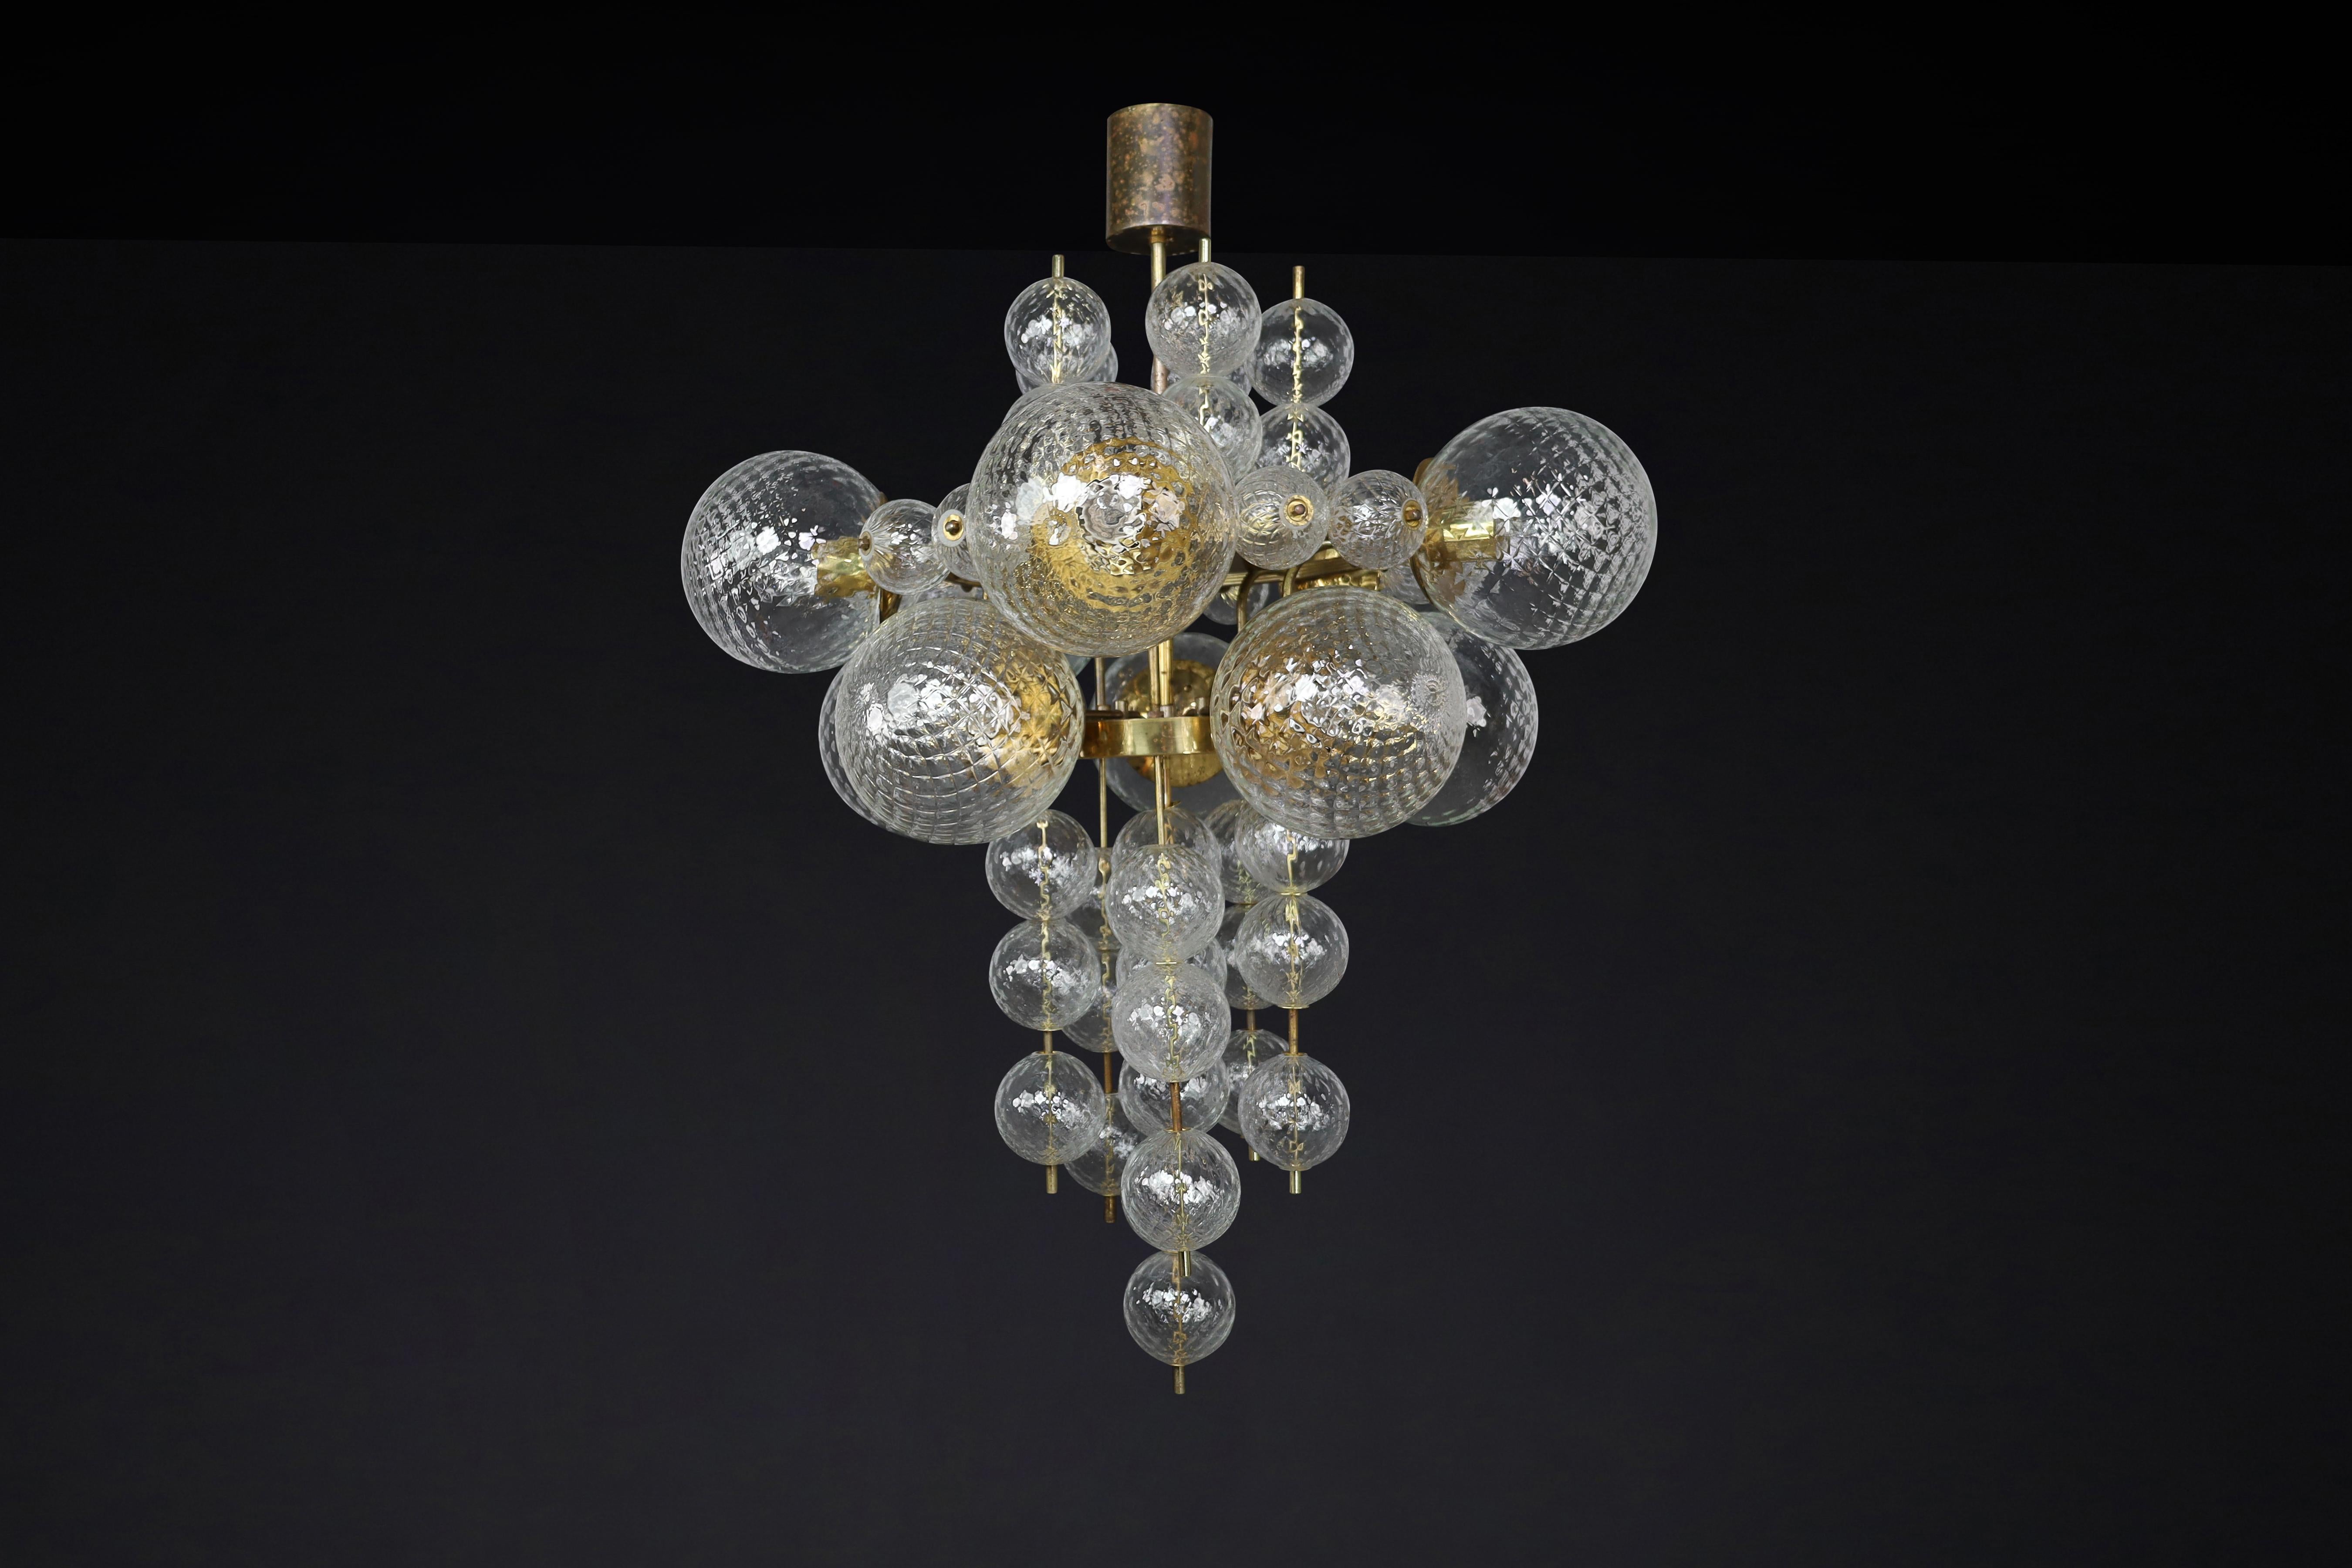  Chandelier with Patinated brass fixture and hand-blowed glass globes  CZ 1960s For Sale 1